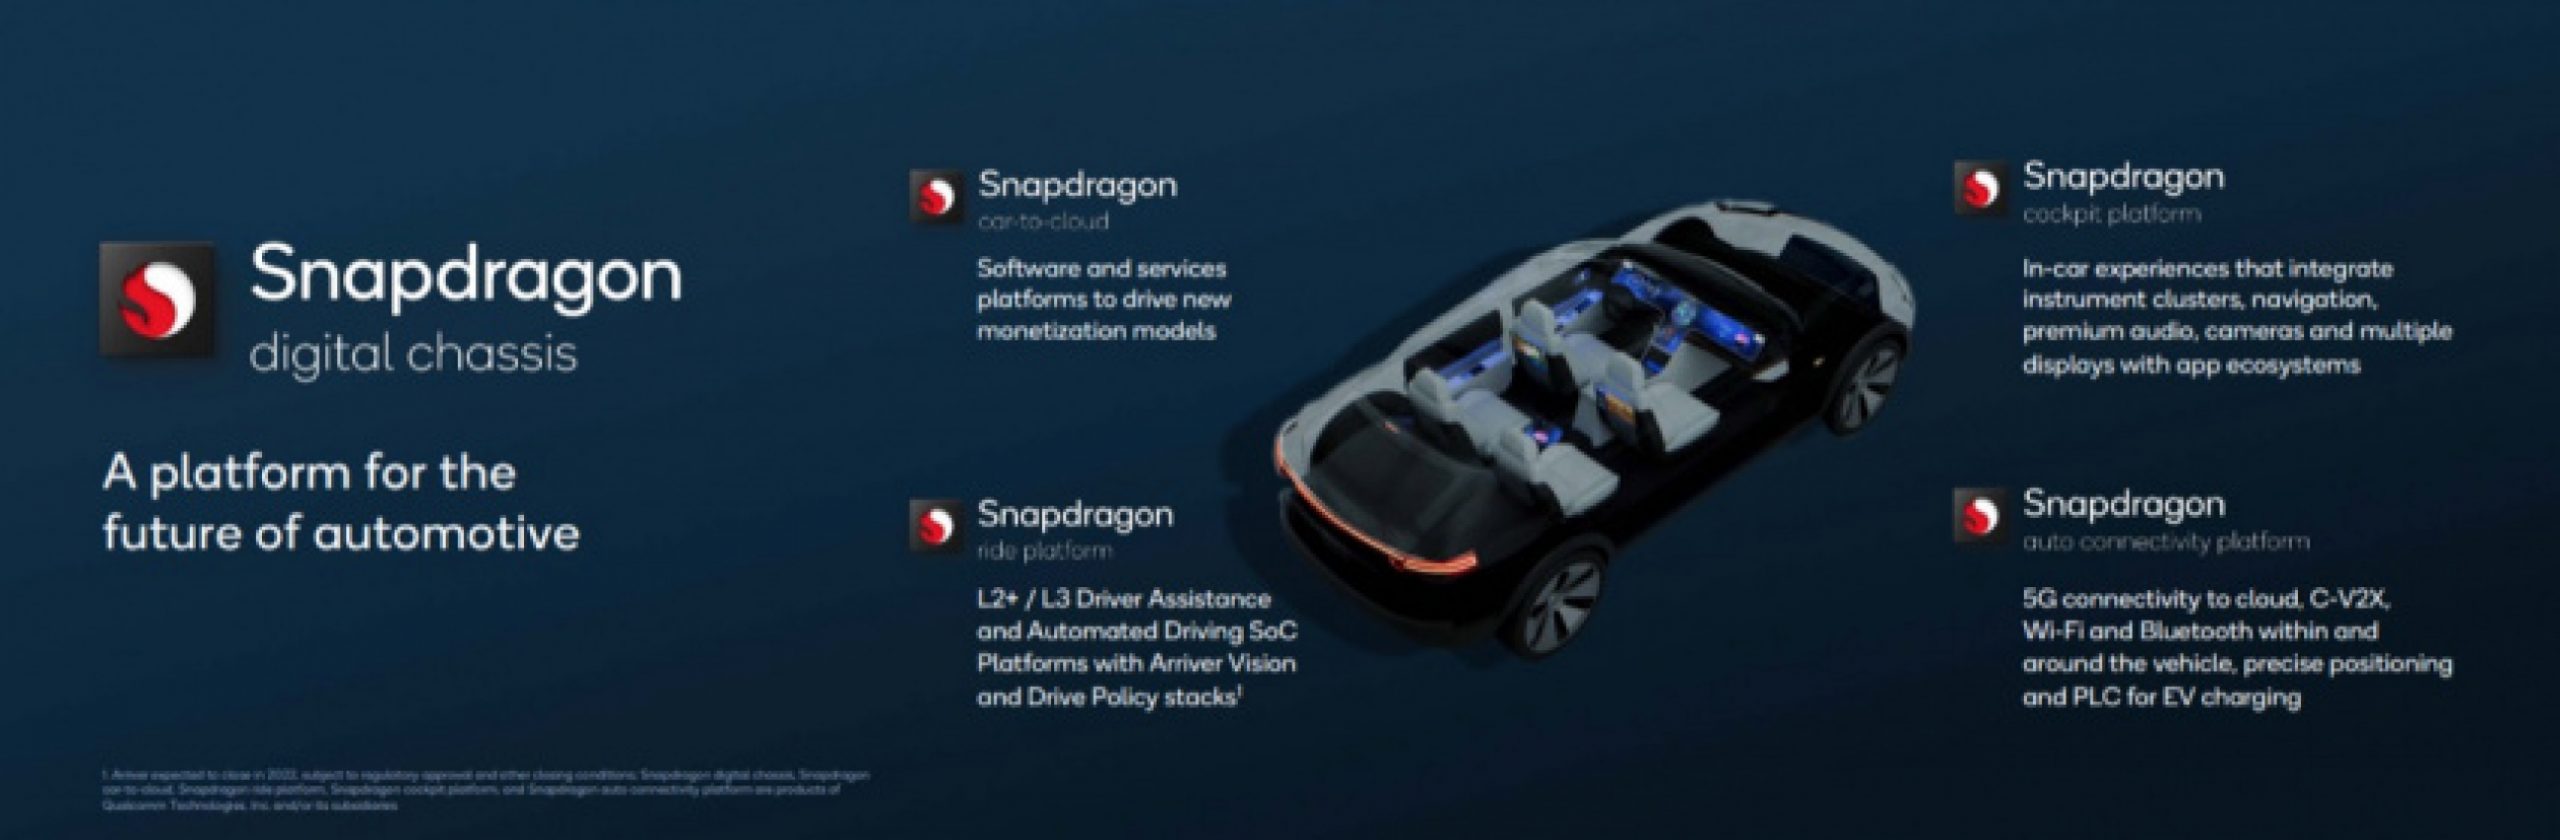 autos, cars, featured, cloud services, connectivity, qualcomm, qualcomm technologies, snapdragon digital chassis, telematics, wifi, qualcomm highlights new snapdragon digital chassis for future connected cars